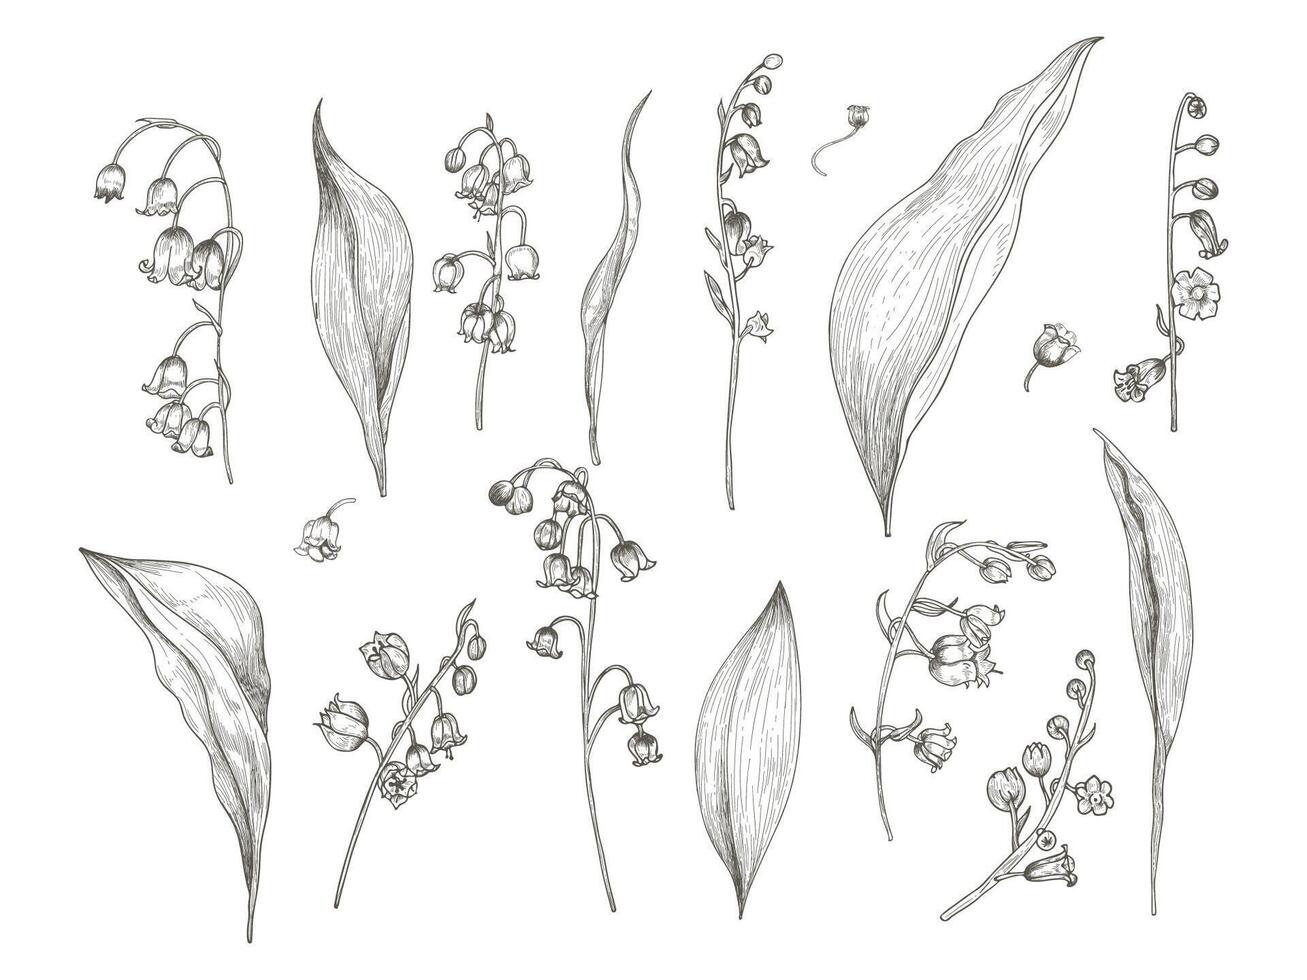 Gorgeous drawing of lily of the valley parts - flower, inflorescence, stem, leaves. Blooming plant hand drawn in vintage engraving style. View from different angles. Botanical vector illustration.